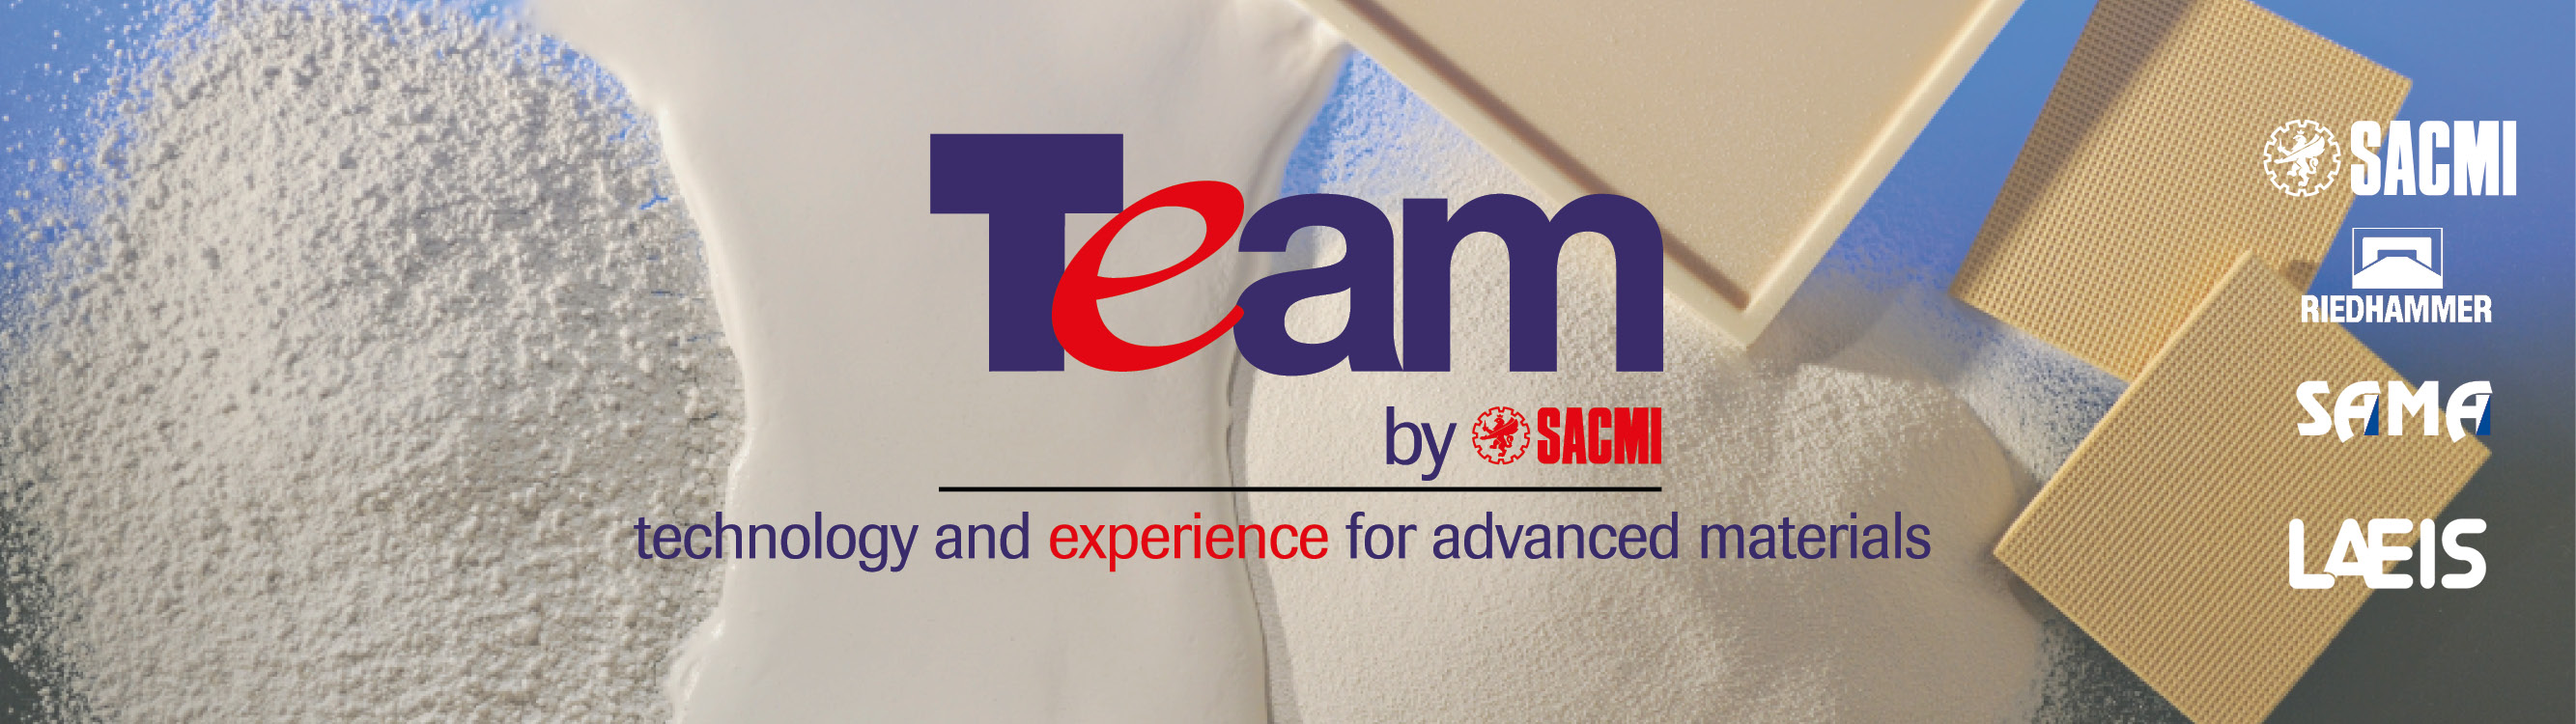 SACMI Group combines competence in Advanced Ceramics